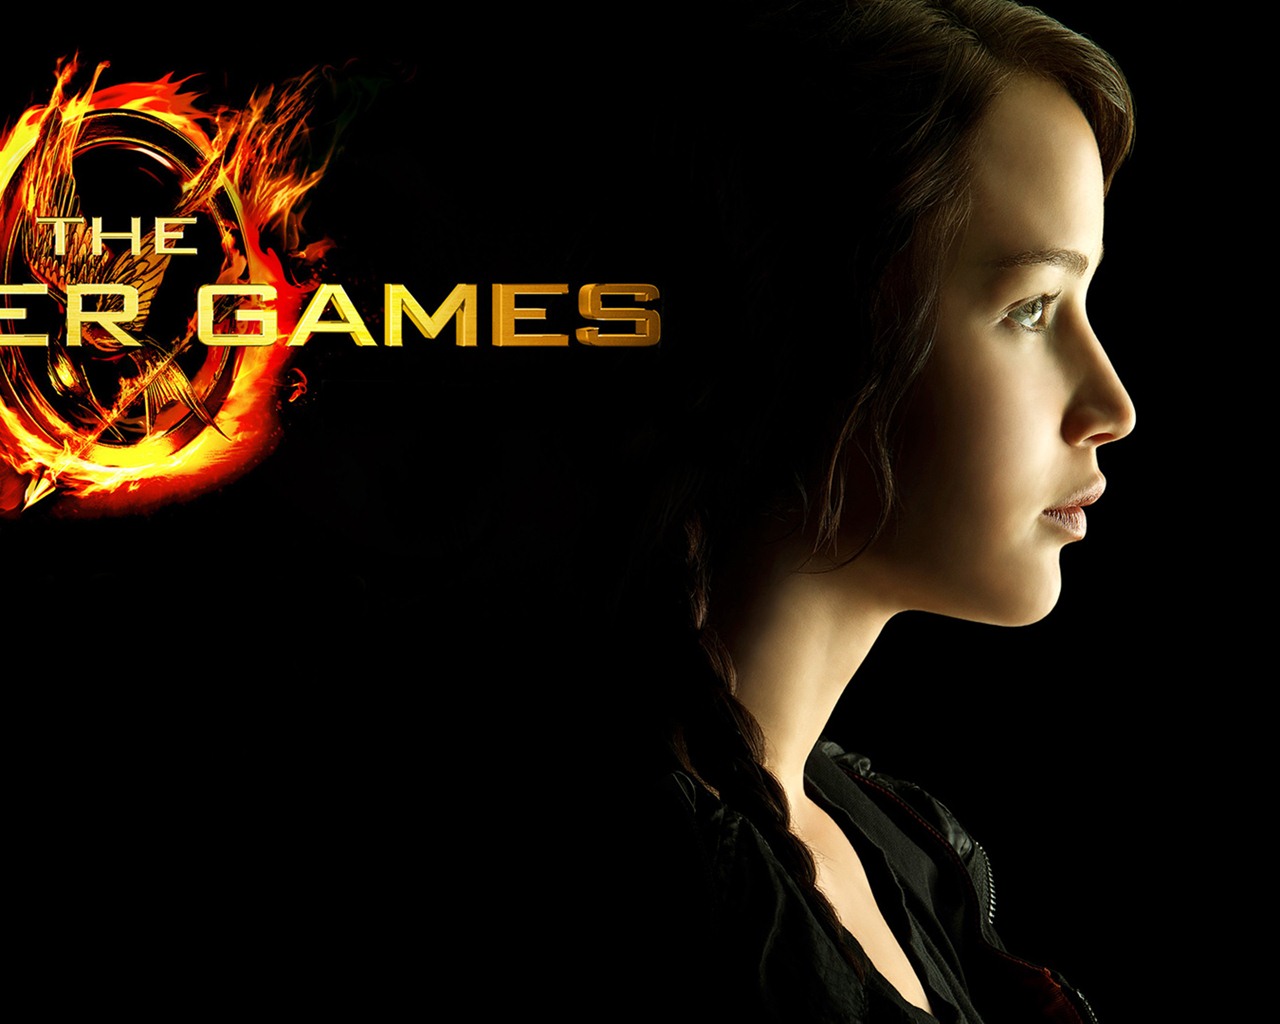 The Hunger Games HD wallpapers #7 - 1280x1024